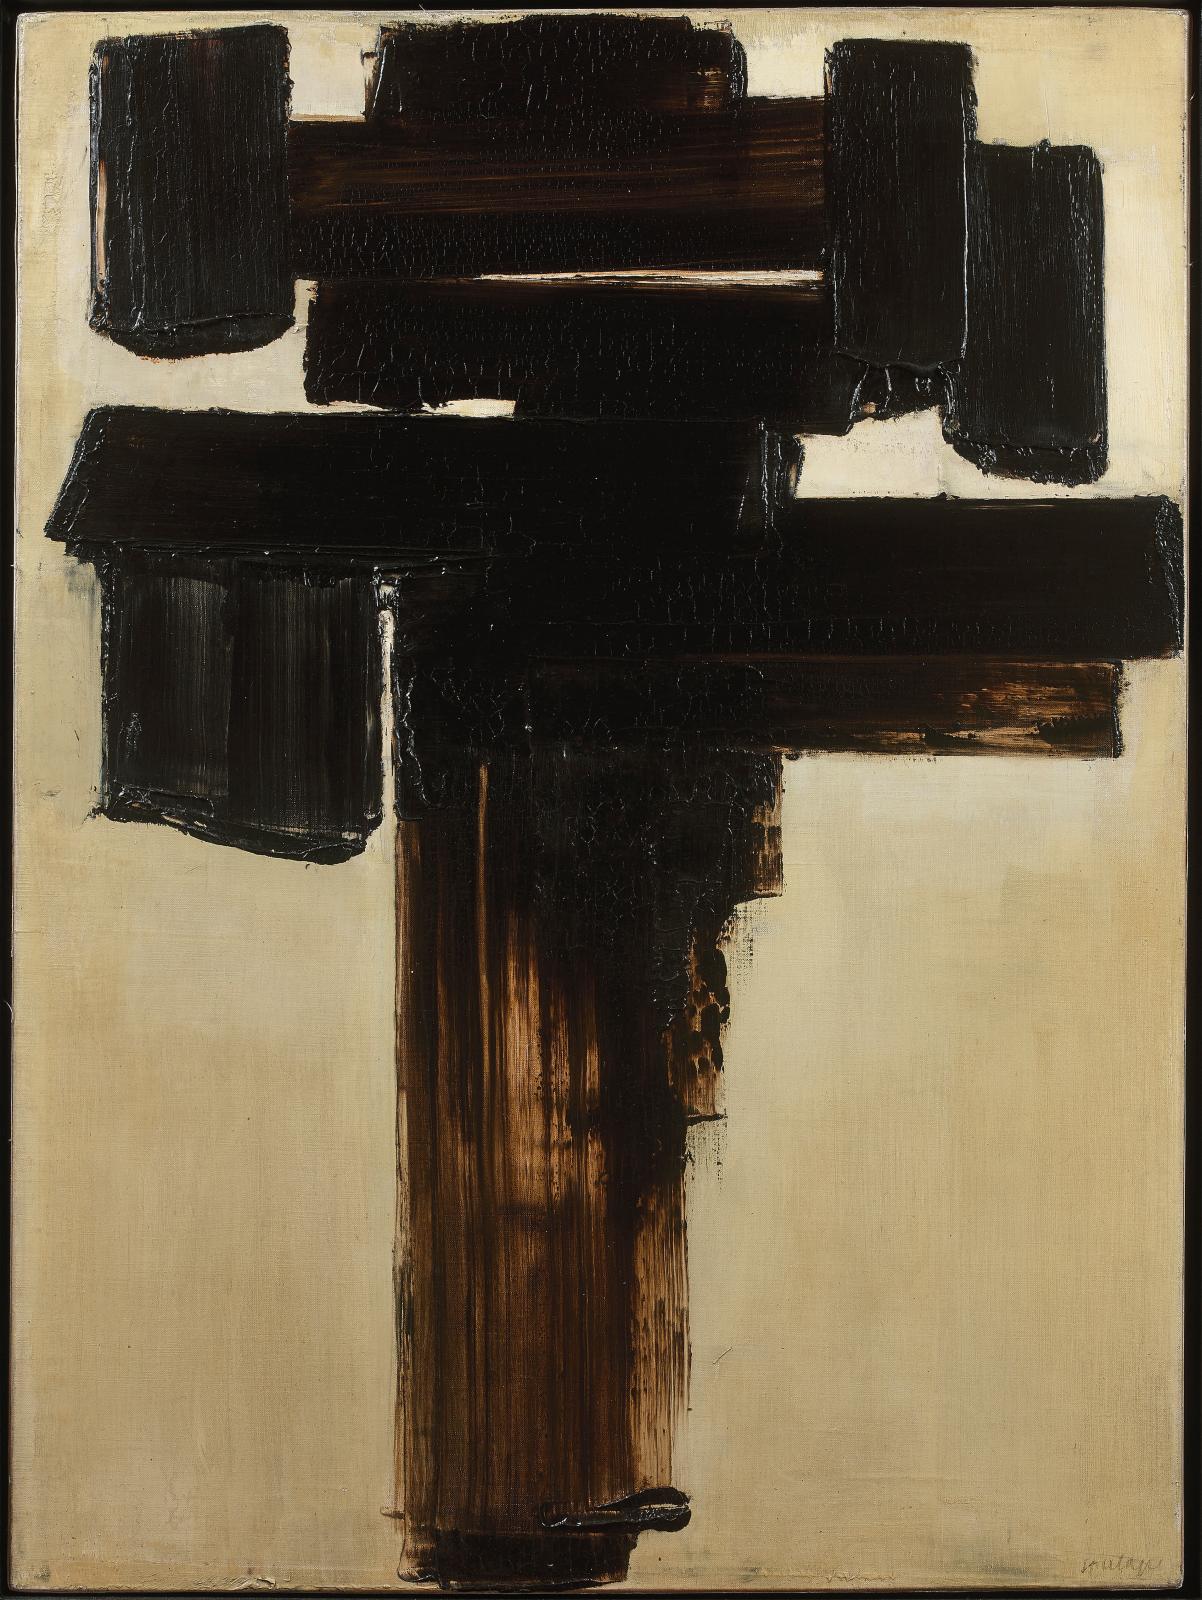 Soulages and Senghor: Linked Through Poetry